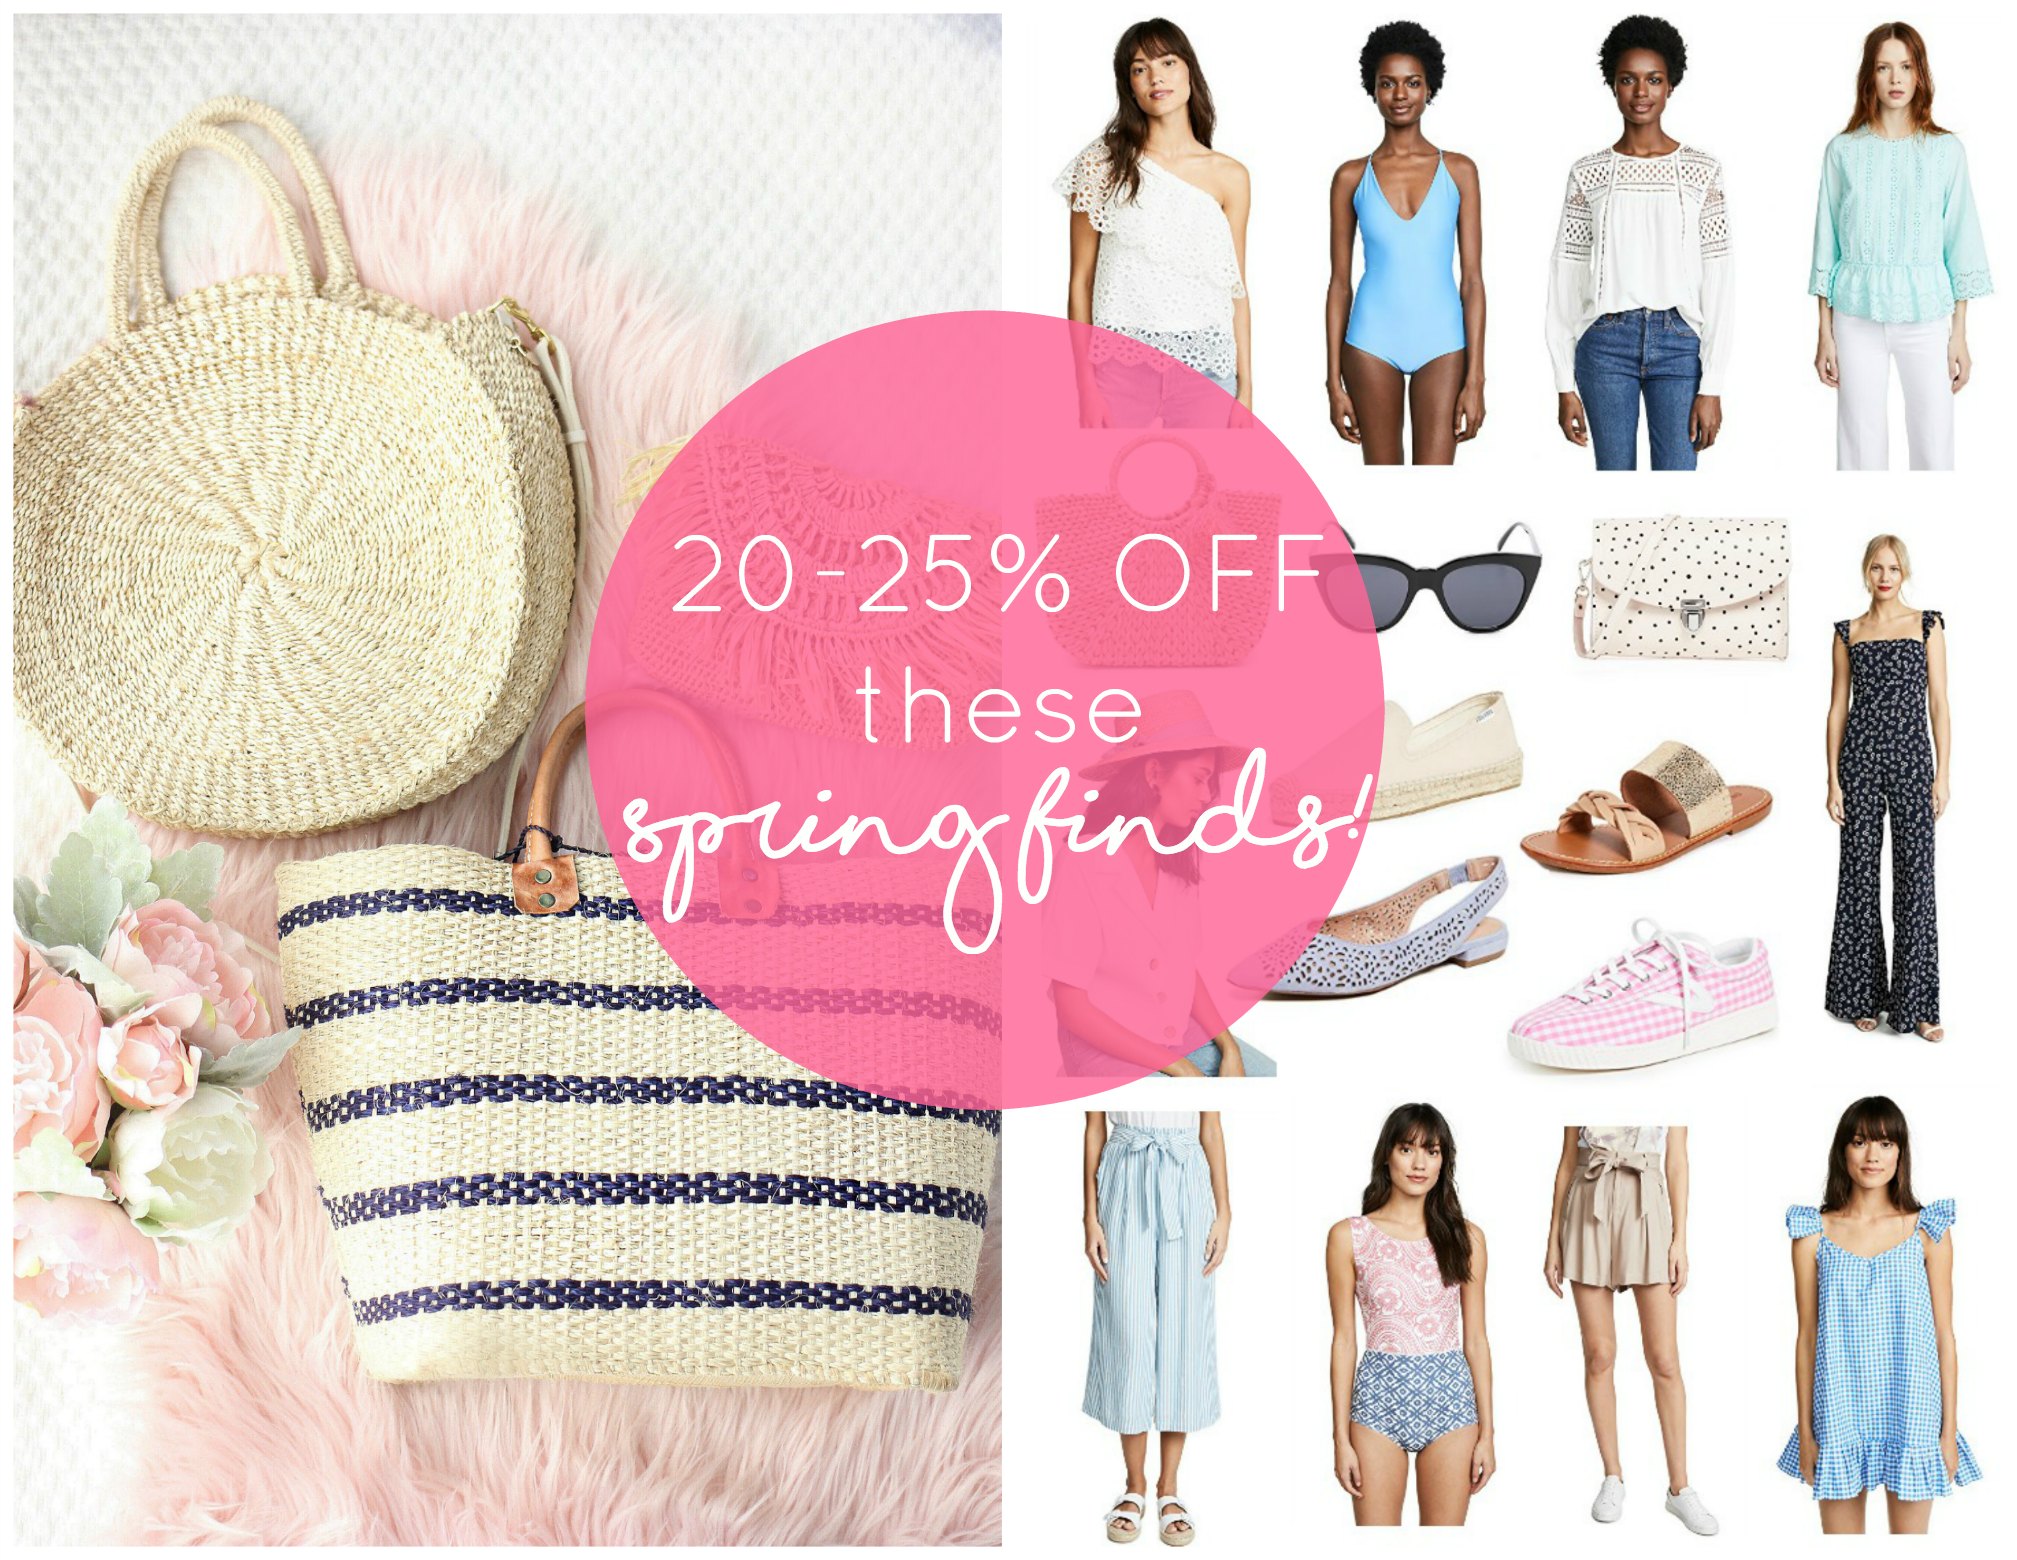 These Gorgeous Spring Finds are All 20-25% Off